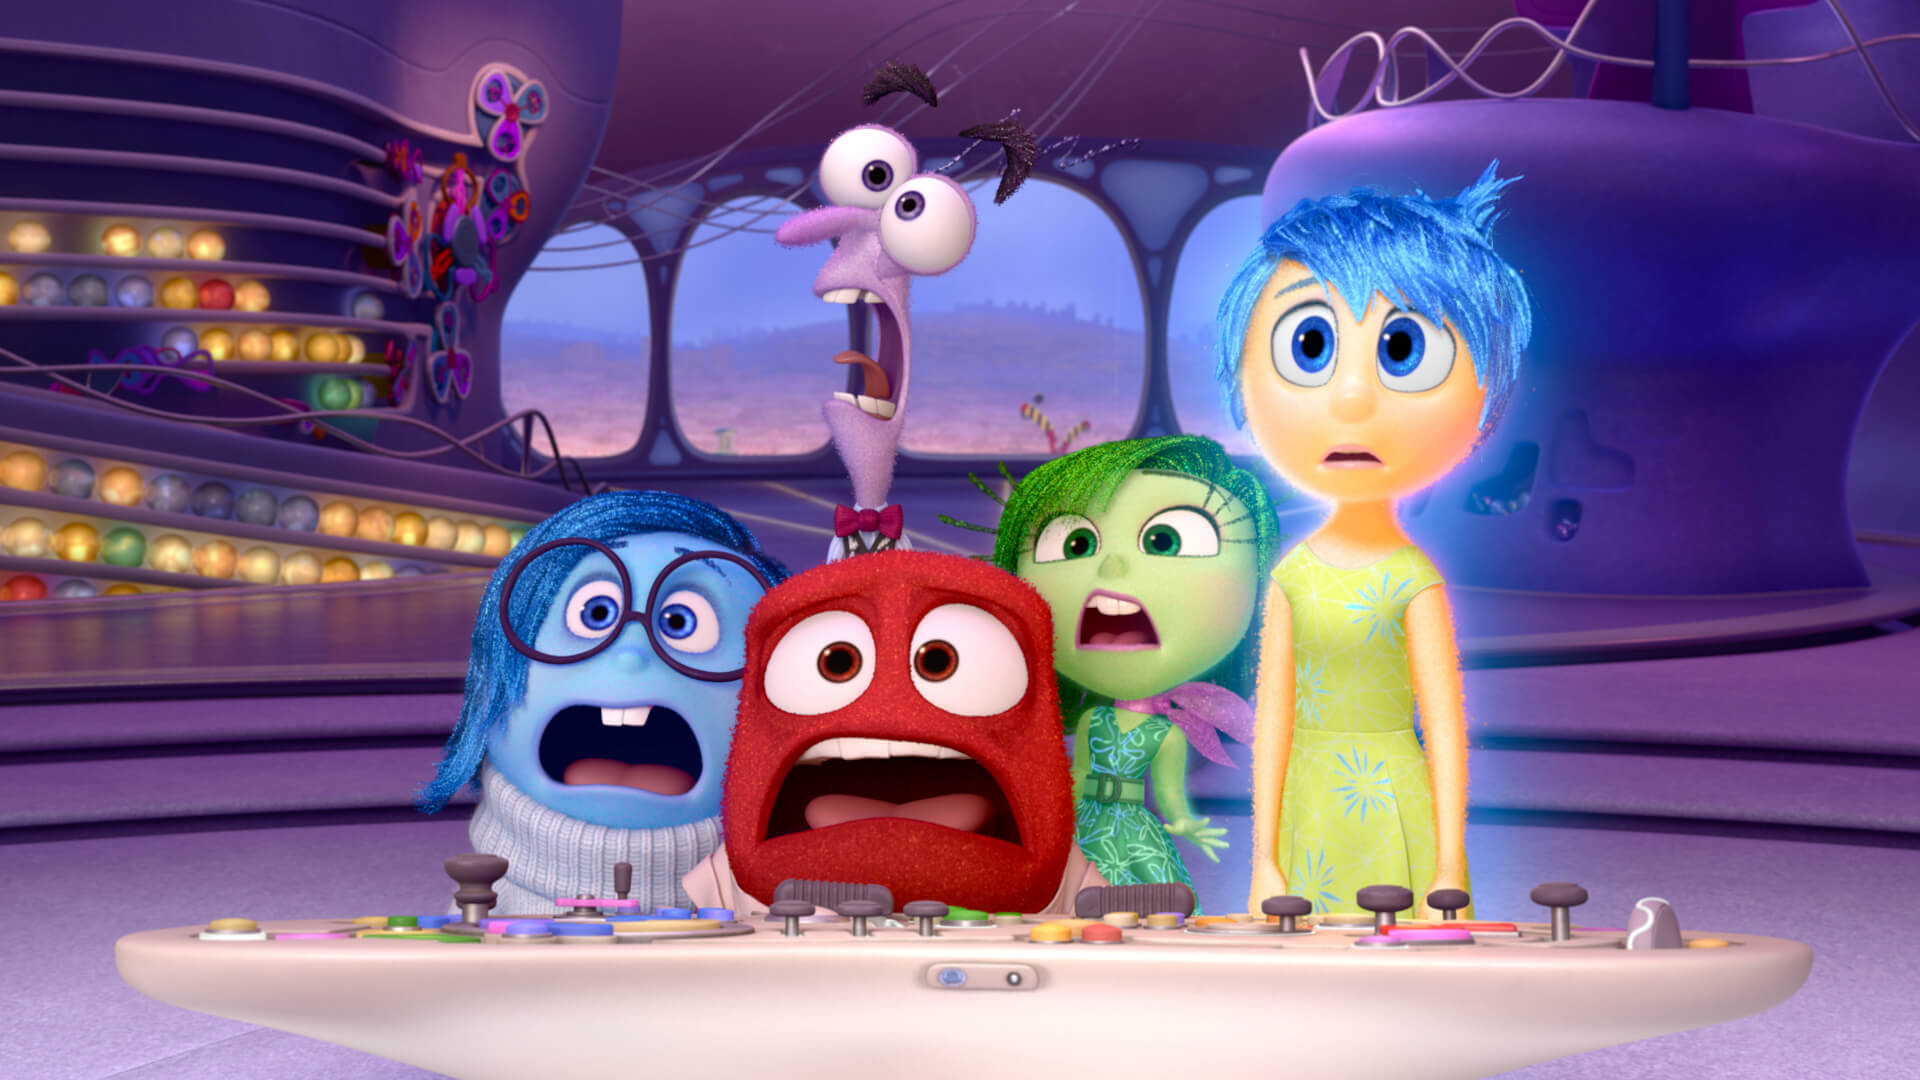 The four emotions represented in "Inside Out"